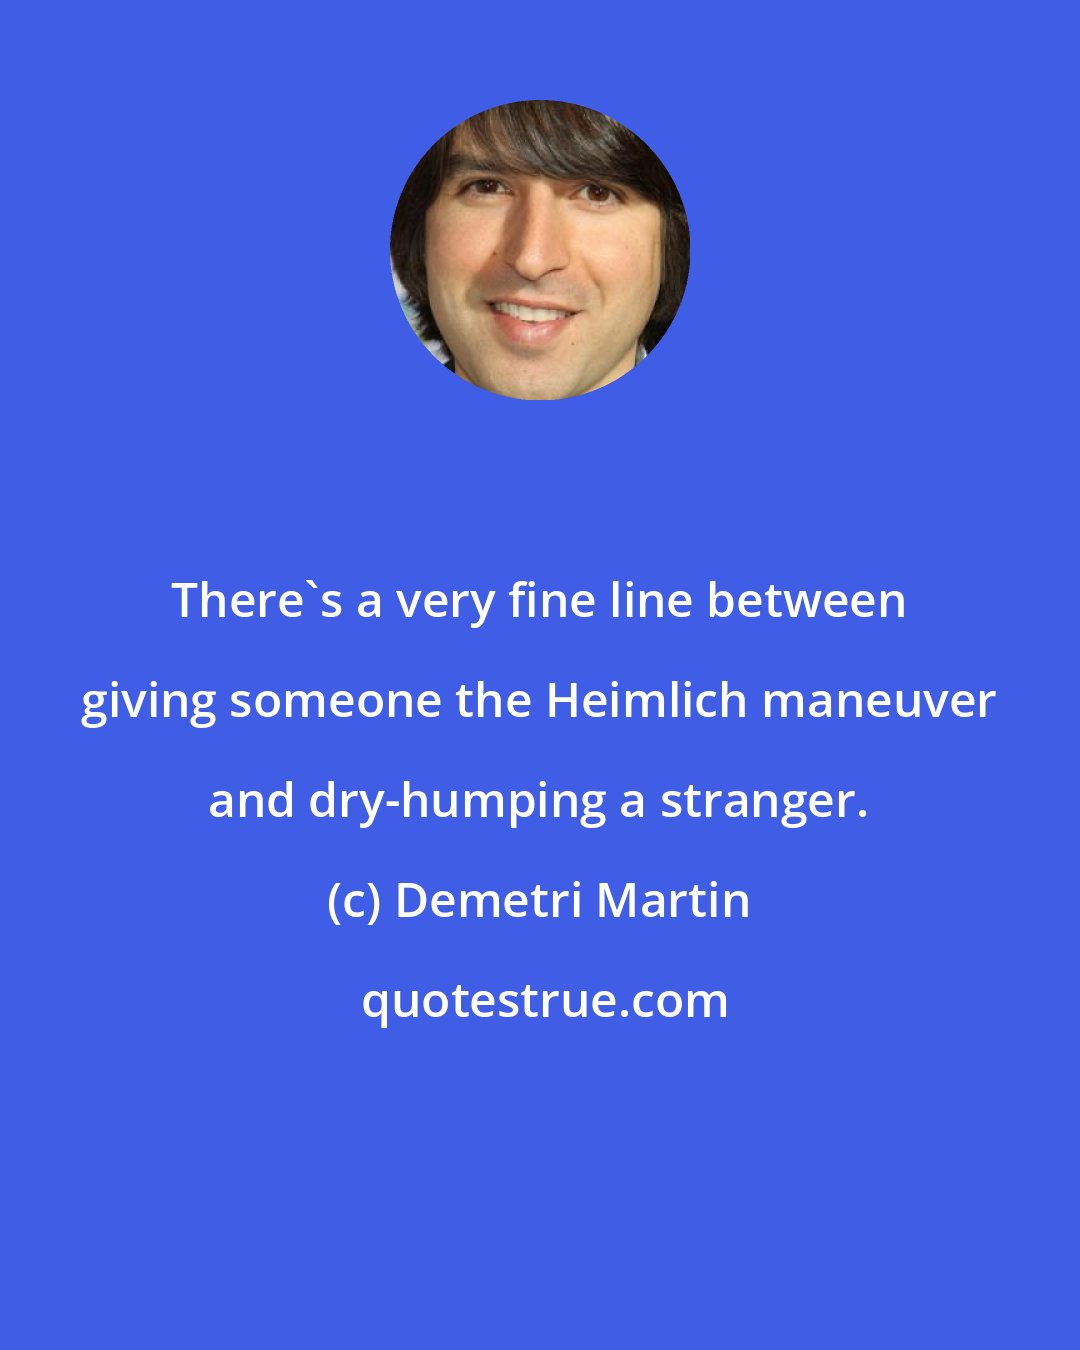 Demetri Martin: There's a very fine line between giving someone the Heimlich maneuver and dry-humping a stranger.